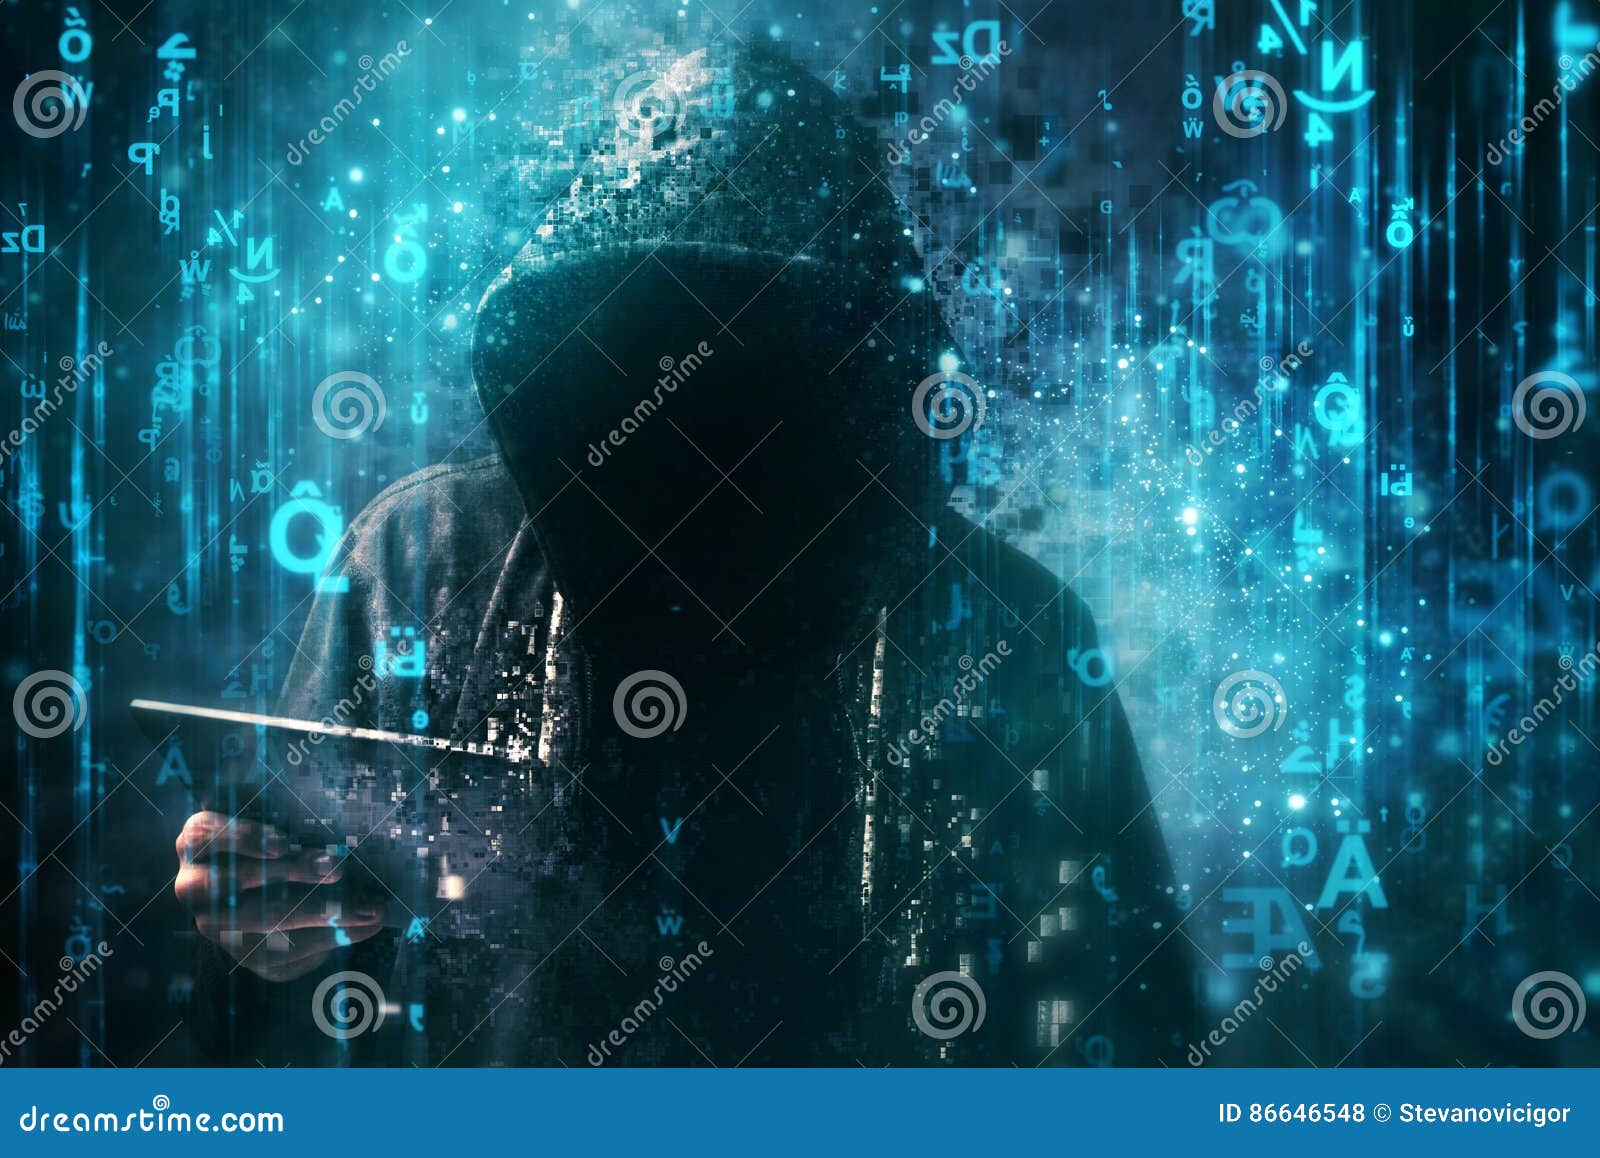 computer hacker with hoodie in cyberspace surrounded by matrix code